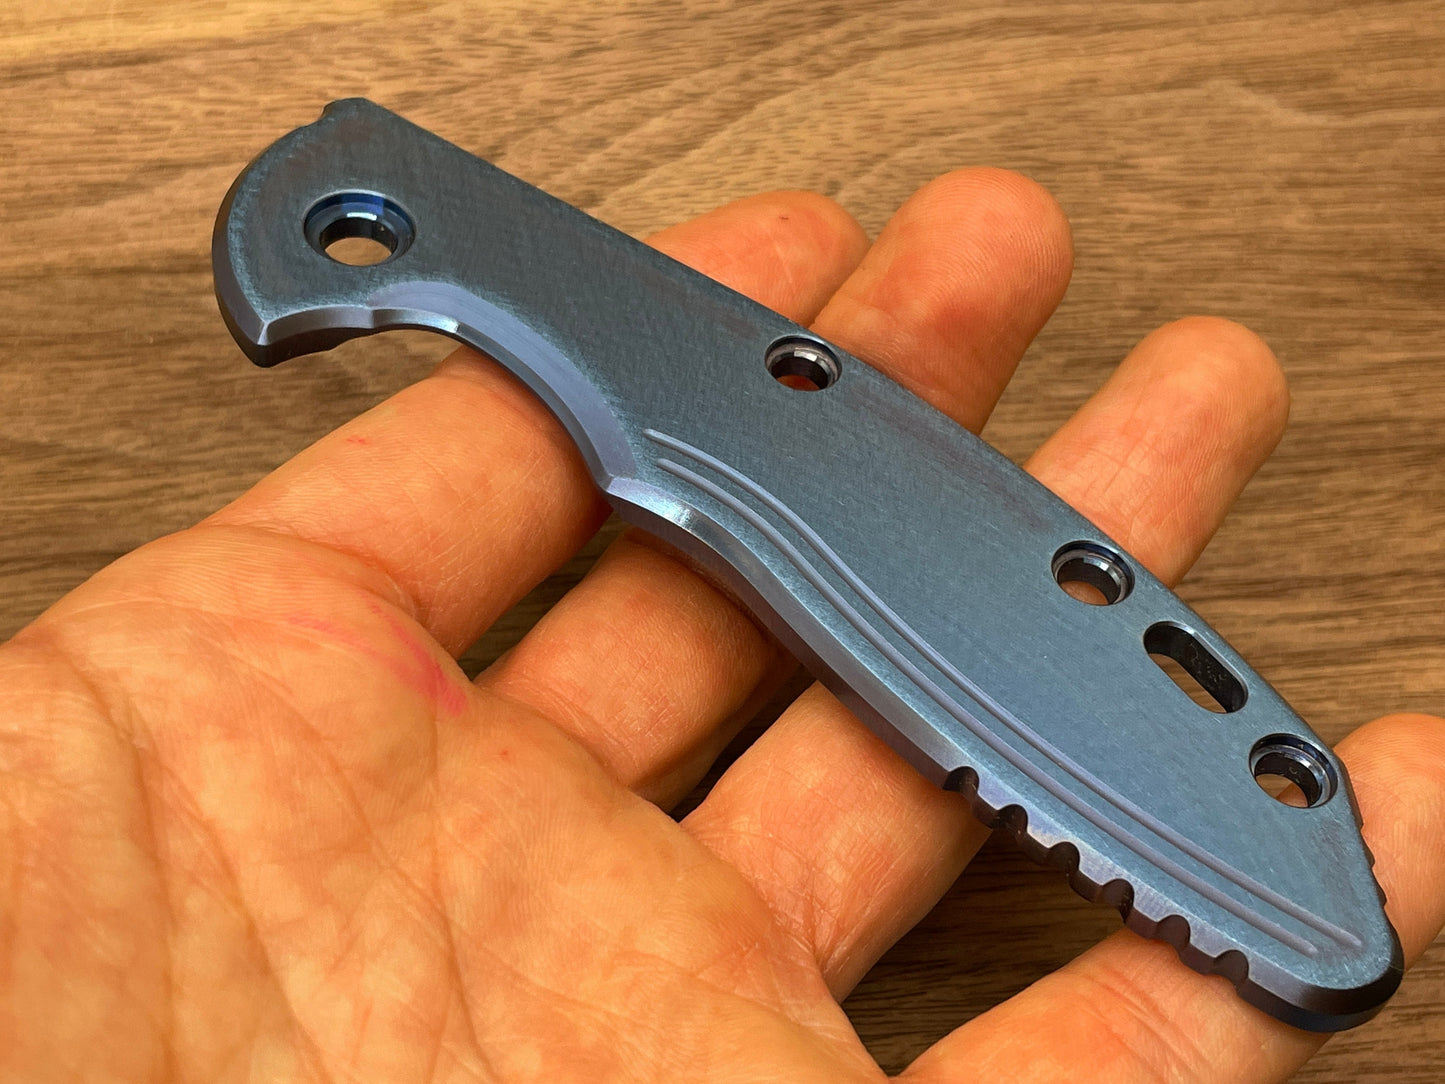 Blue Anodized Deep Brushed Titanium scale for XM-18 3.5 HINDERER